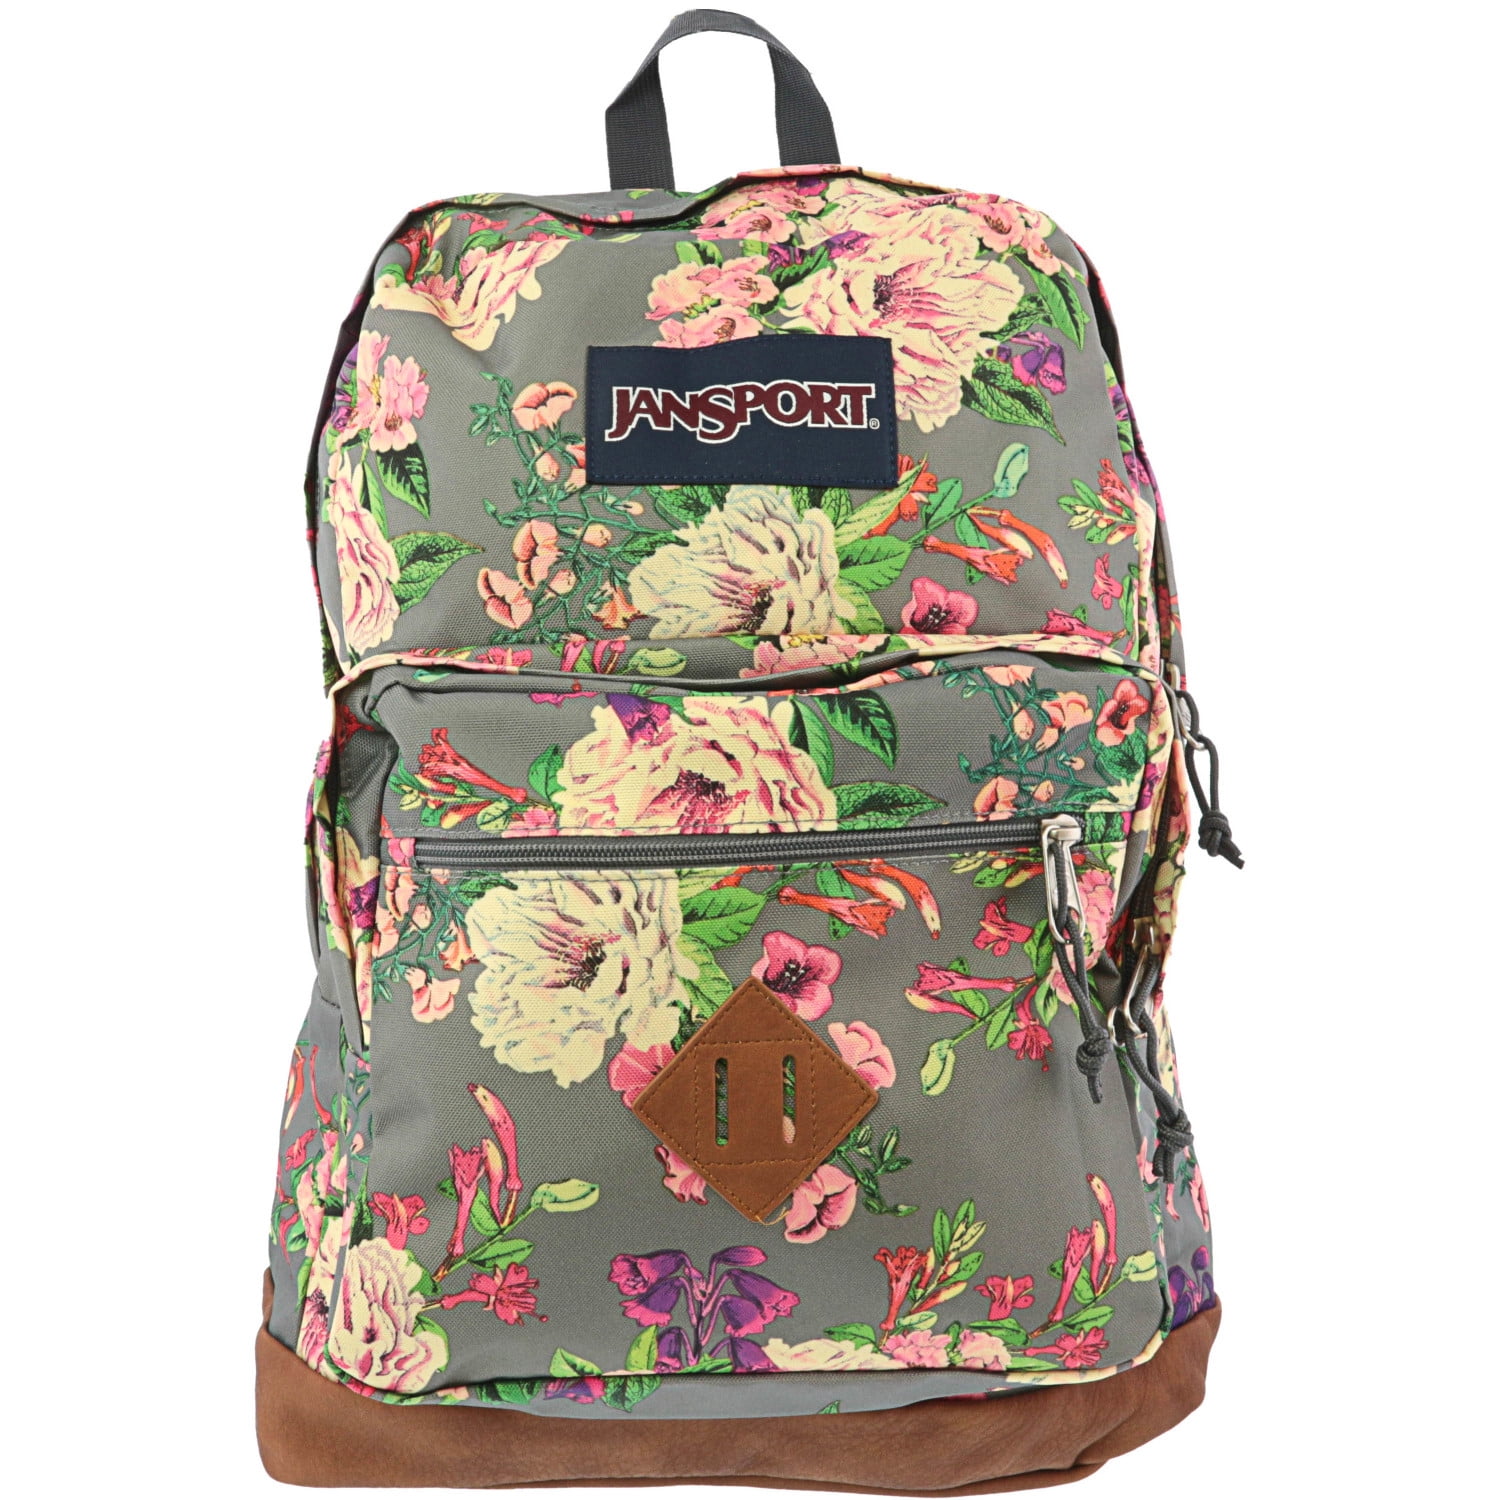 JanSport - Jansport City View Polyester Backpack - Grey Bouquet Floral - www.waterandnature.org - www.waterandnature.org